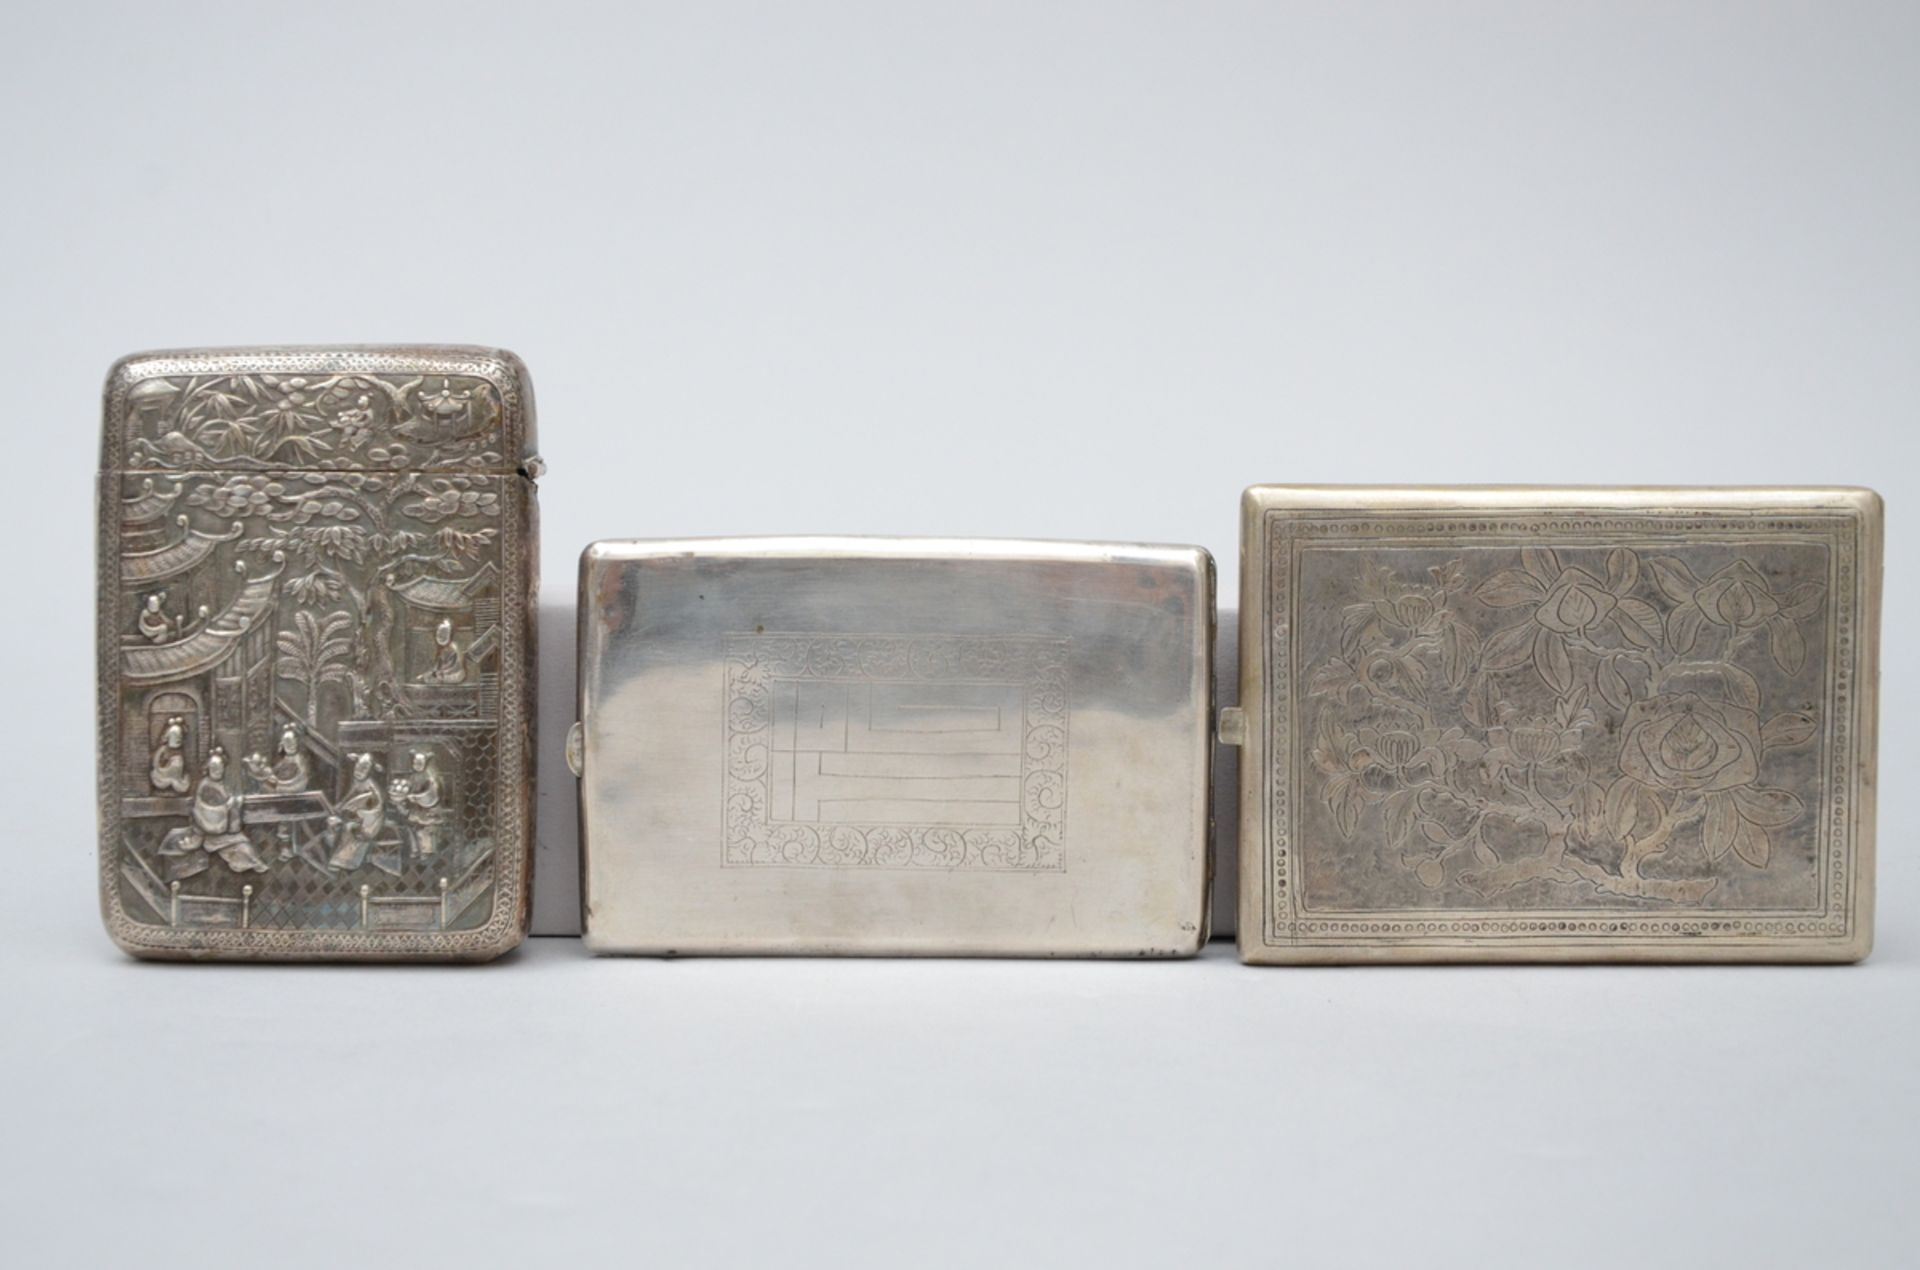 Lot: 3 Chinese silver cigarette cases (11x8 12x8 12x9 cm) (*) - Image 2 of 2